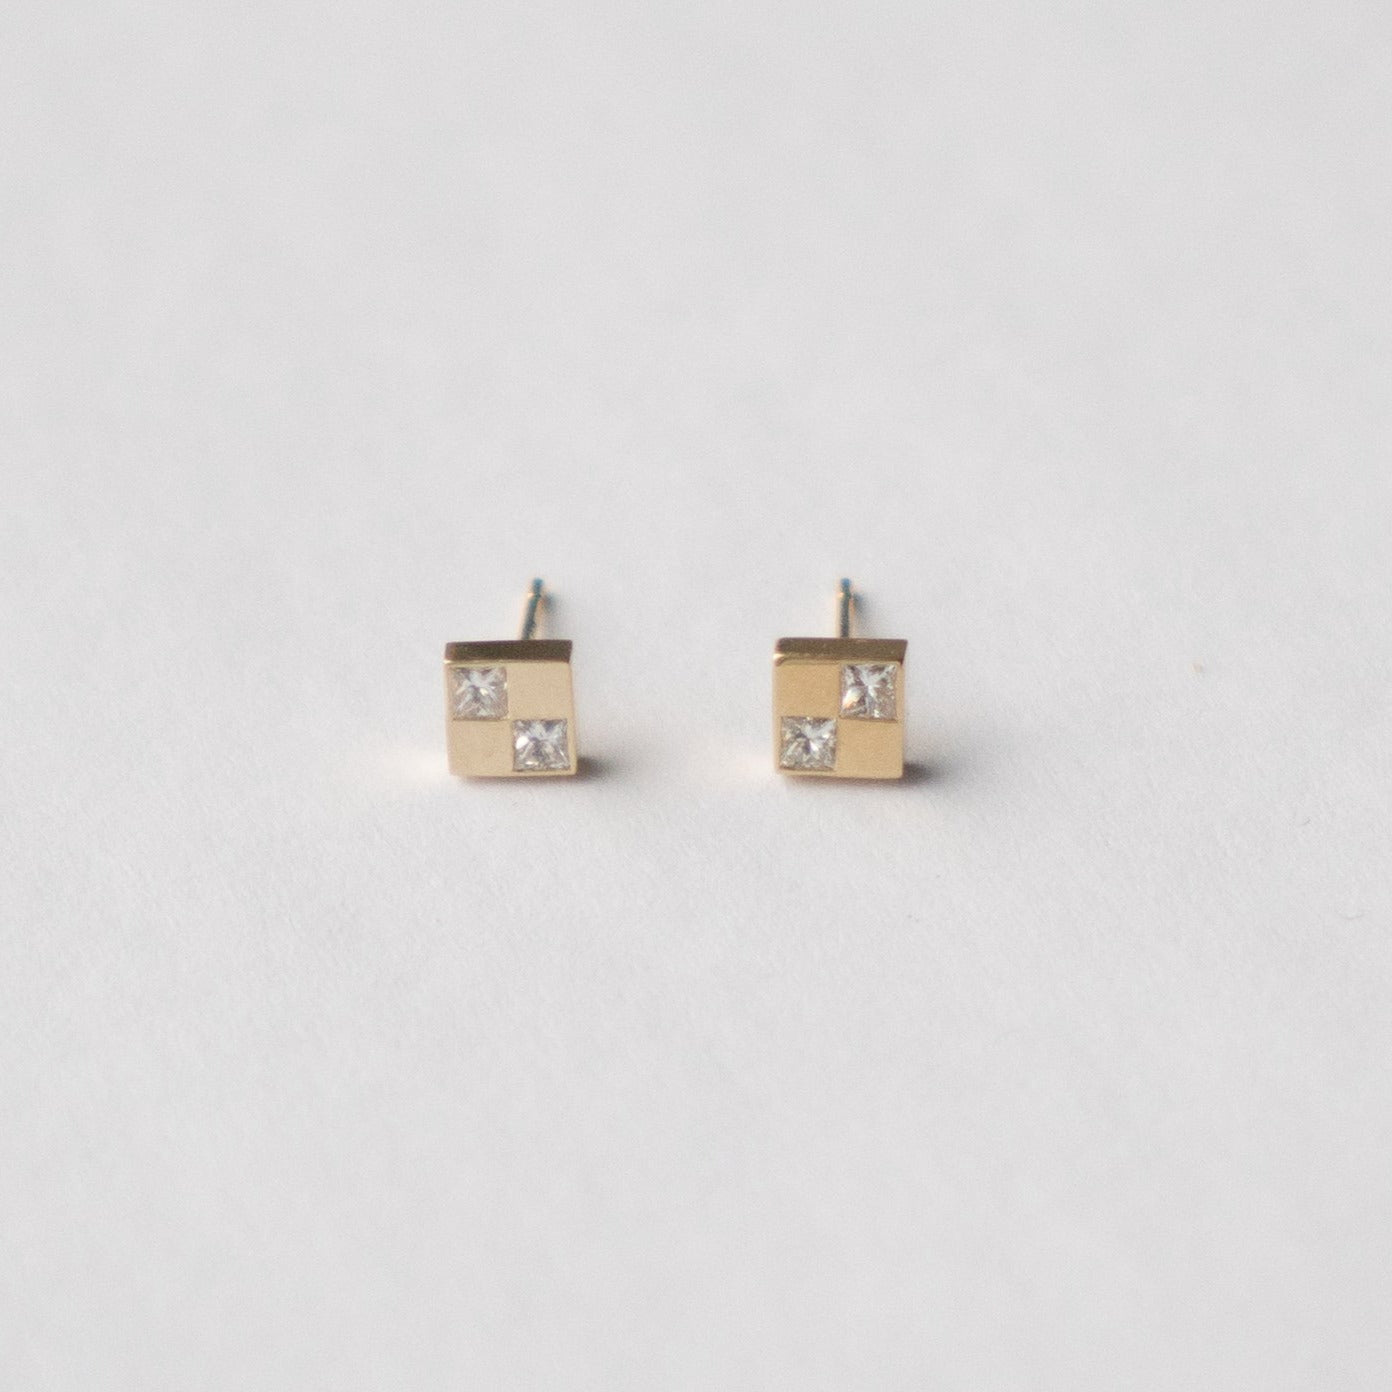 Delicate Sudu Stud Earrings in 14 karat Yellow Gold and Natural White Diamonds by SHW fine Jewelry in NYC